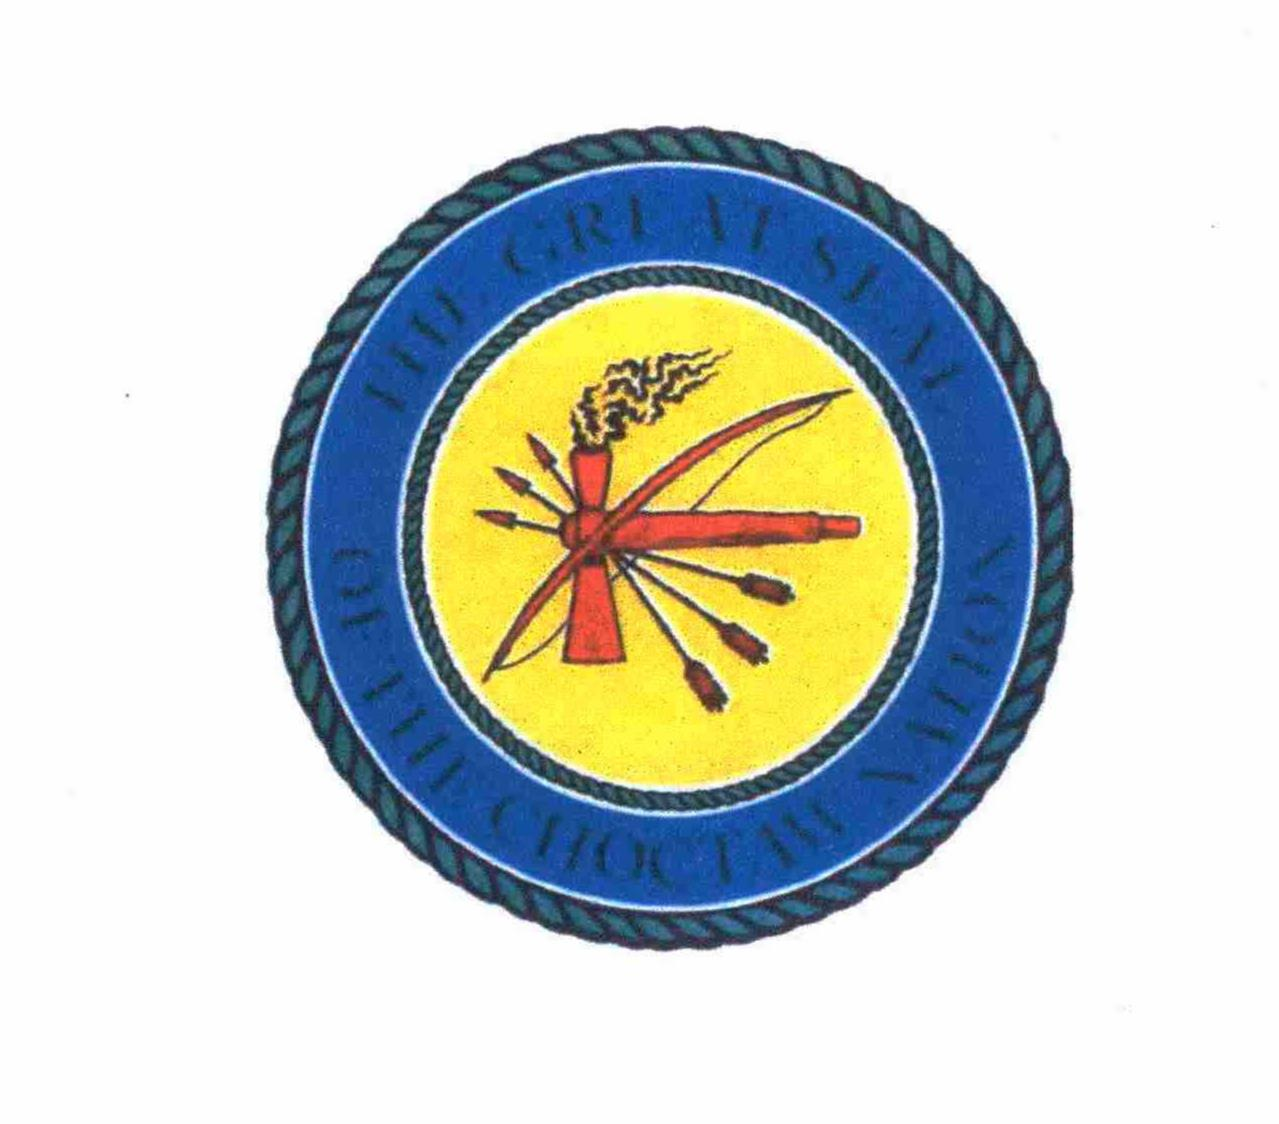 THE GREAT SEAL OF THE CHOCTAW NATION